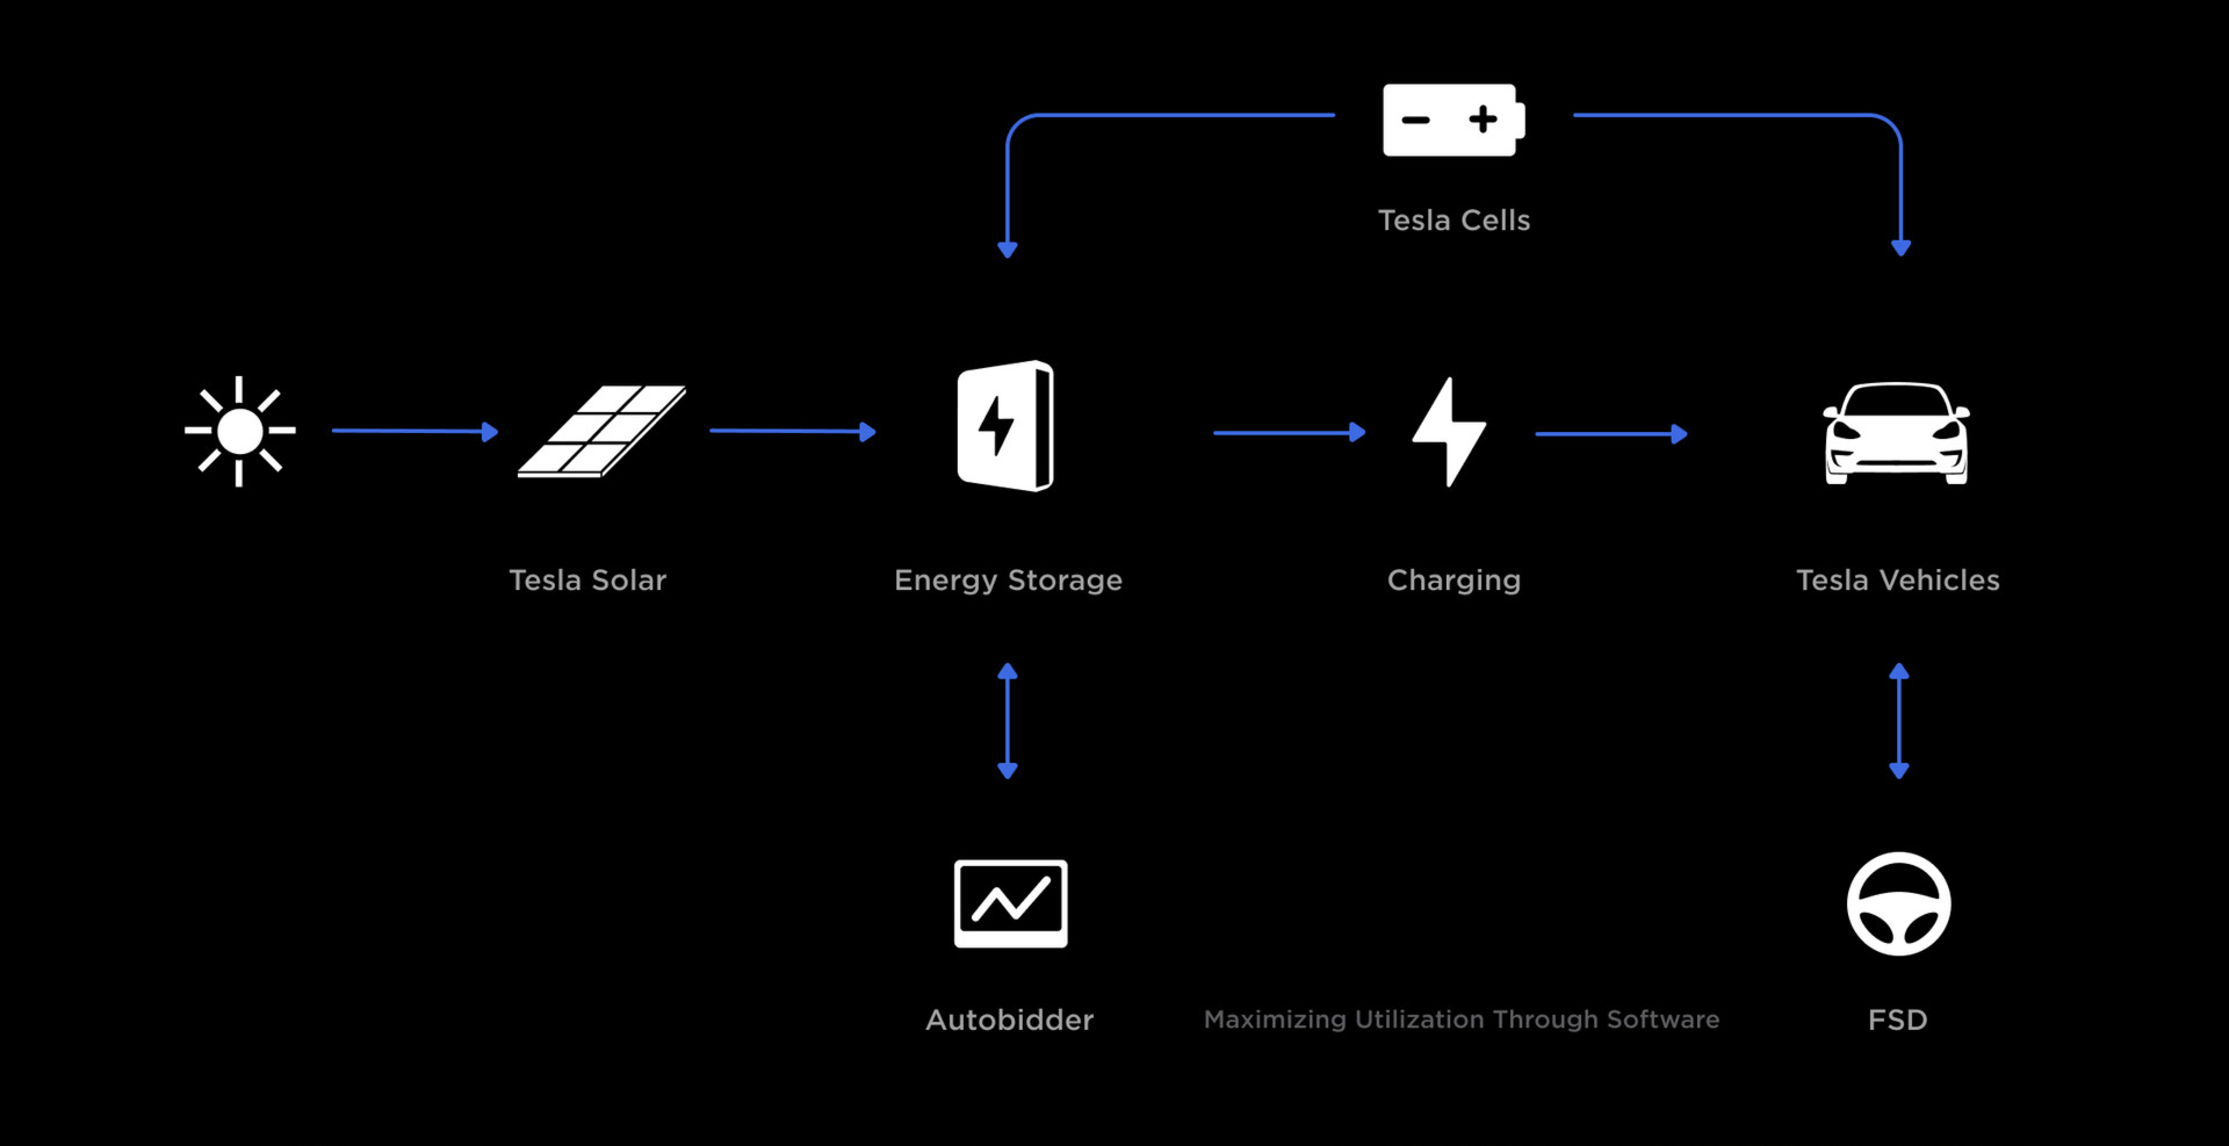 Flow chart displaying how Tesla manufactures a fully integrated energy and transportation ecosystem.